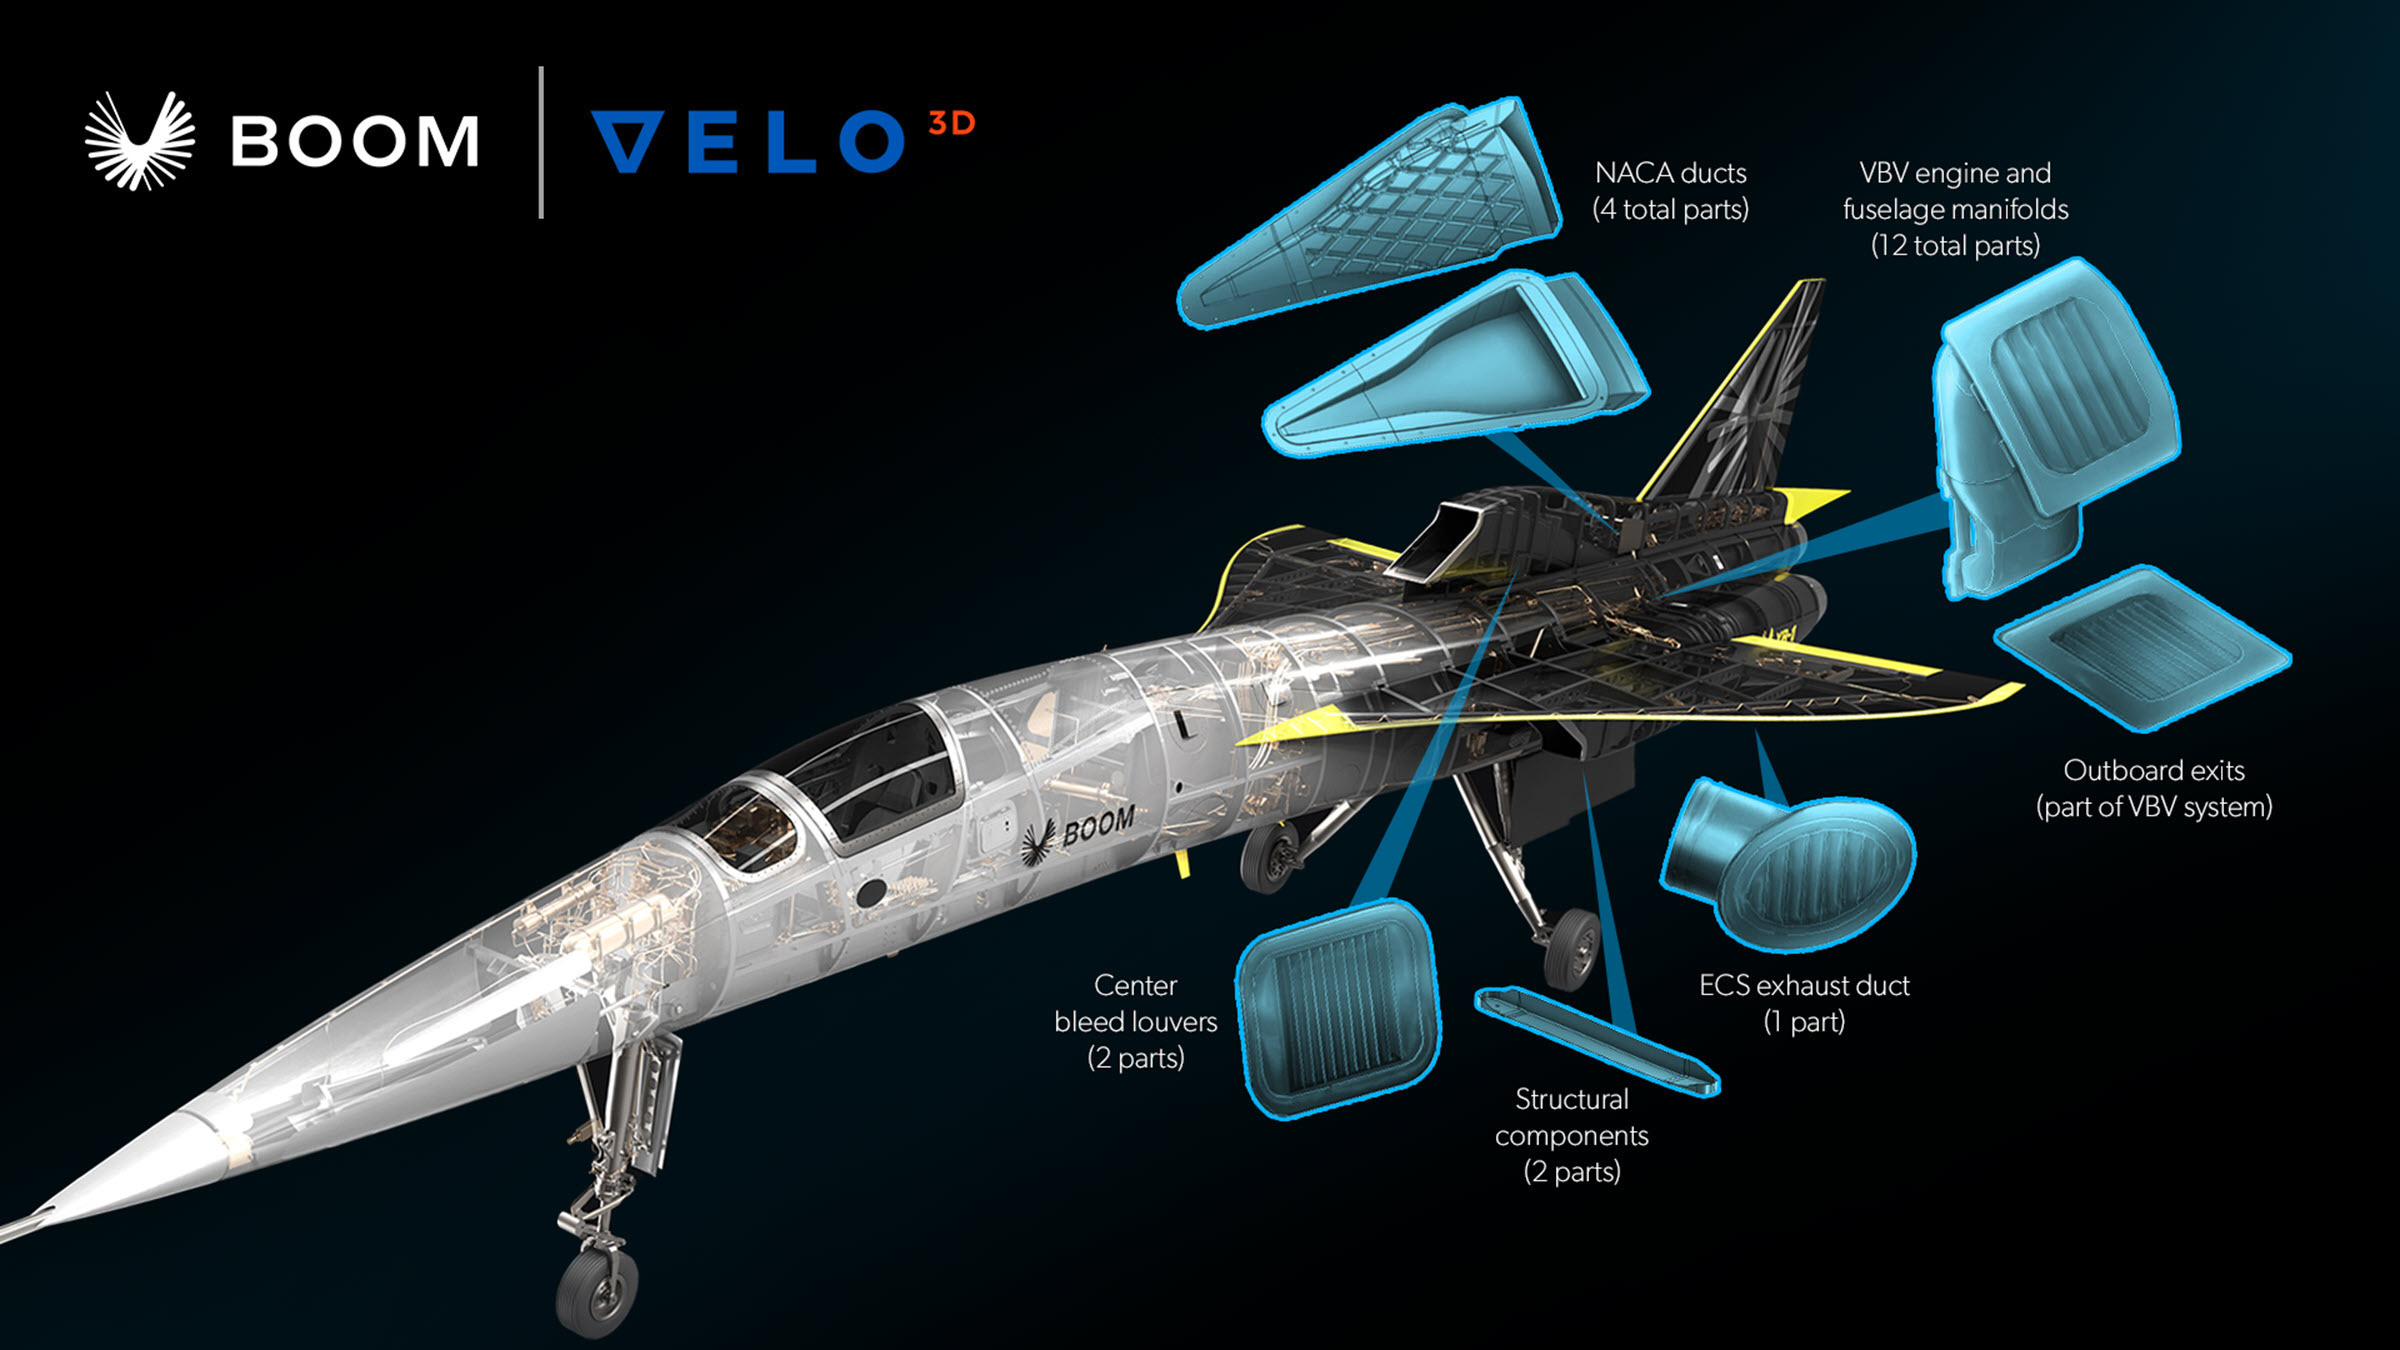 XB-1 will fly with Titanium 3D printed components manufactured on Velo3D’s Sapphire system.